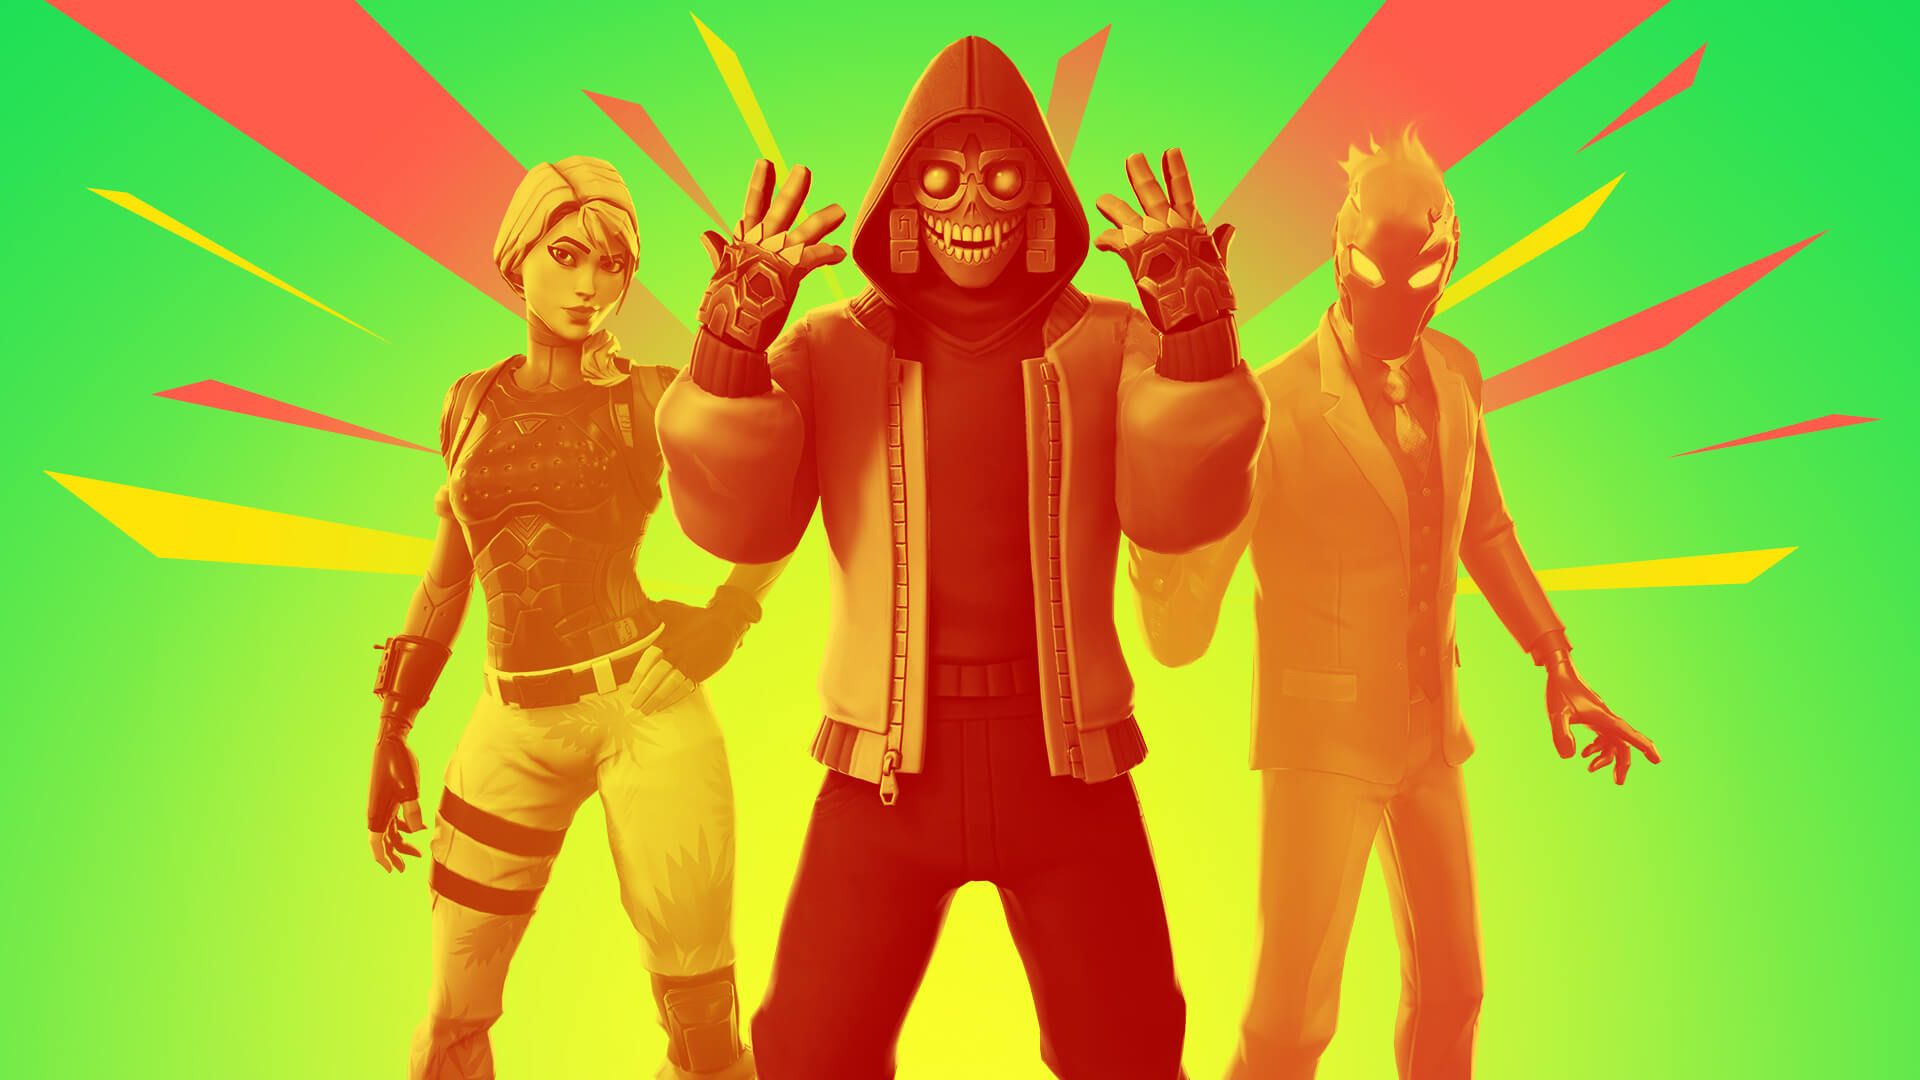 Update on Trios, Xbox Cup and the Fortnite World Cup Finals